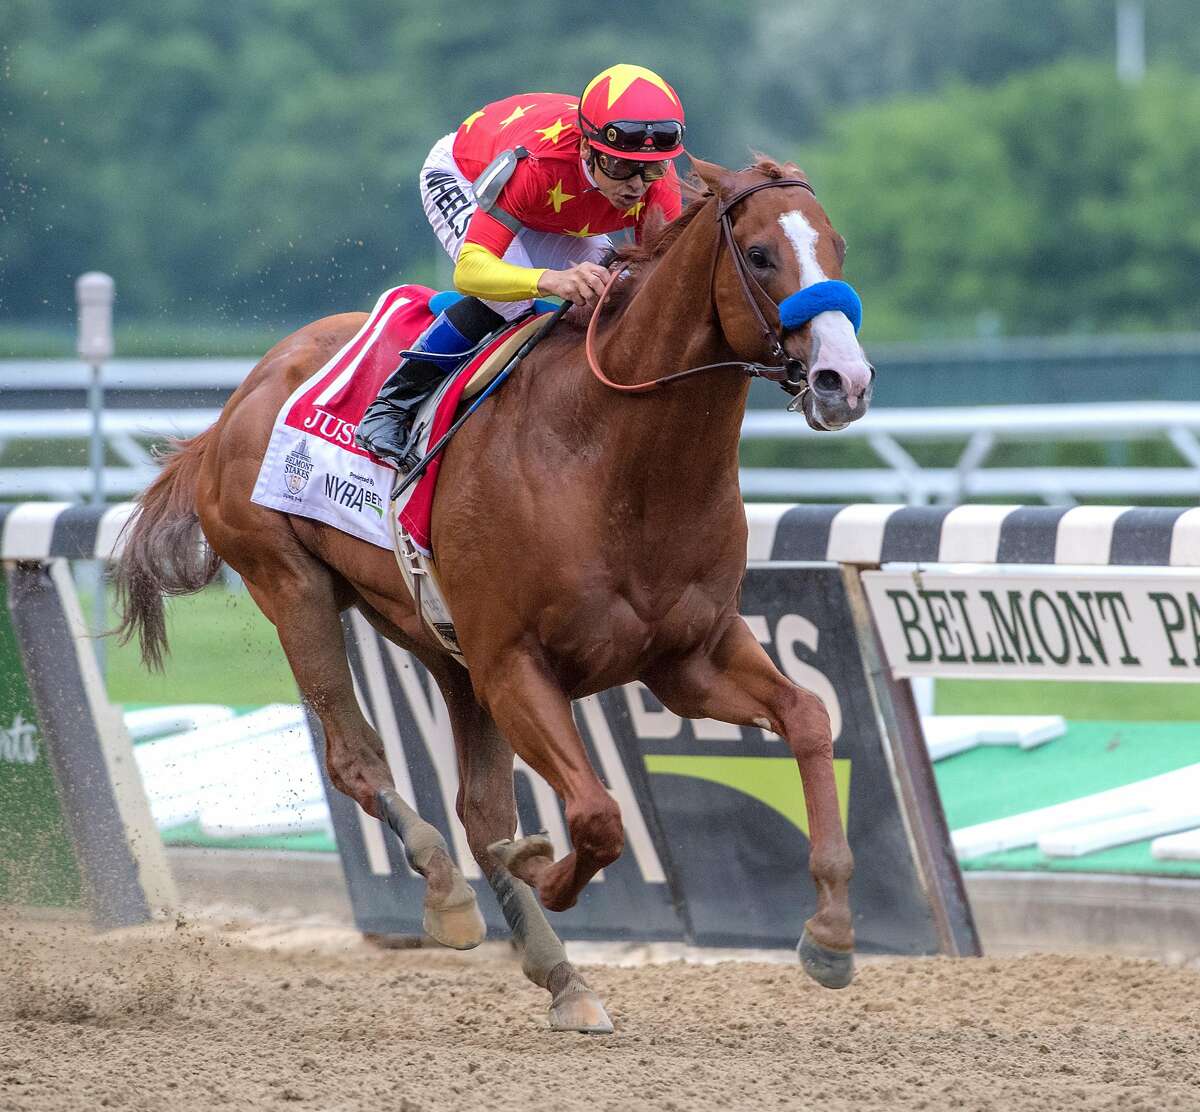 Justify with jockey Mike Smith holds off the competition and wins the 150th running of the Belmont Stakes and the coveted Triple Crown of Thoroughbred race at Belmont Park Saturday June 9, 2018, in Elmont, N.Y. (Skip Dickstein/Times Union)